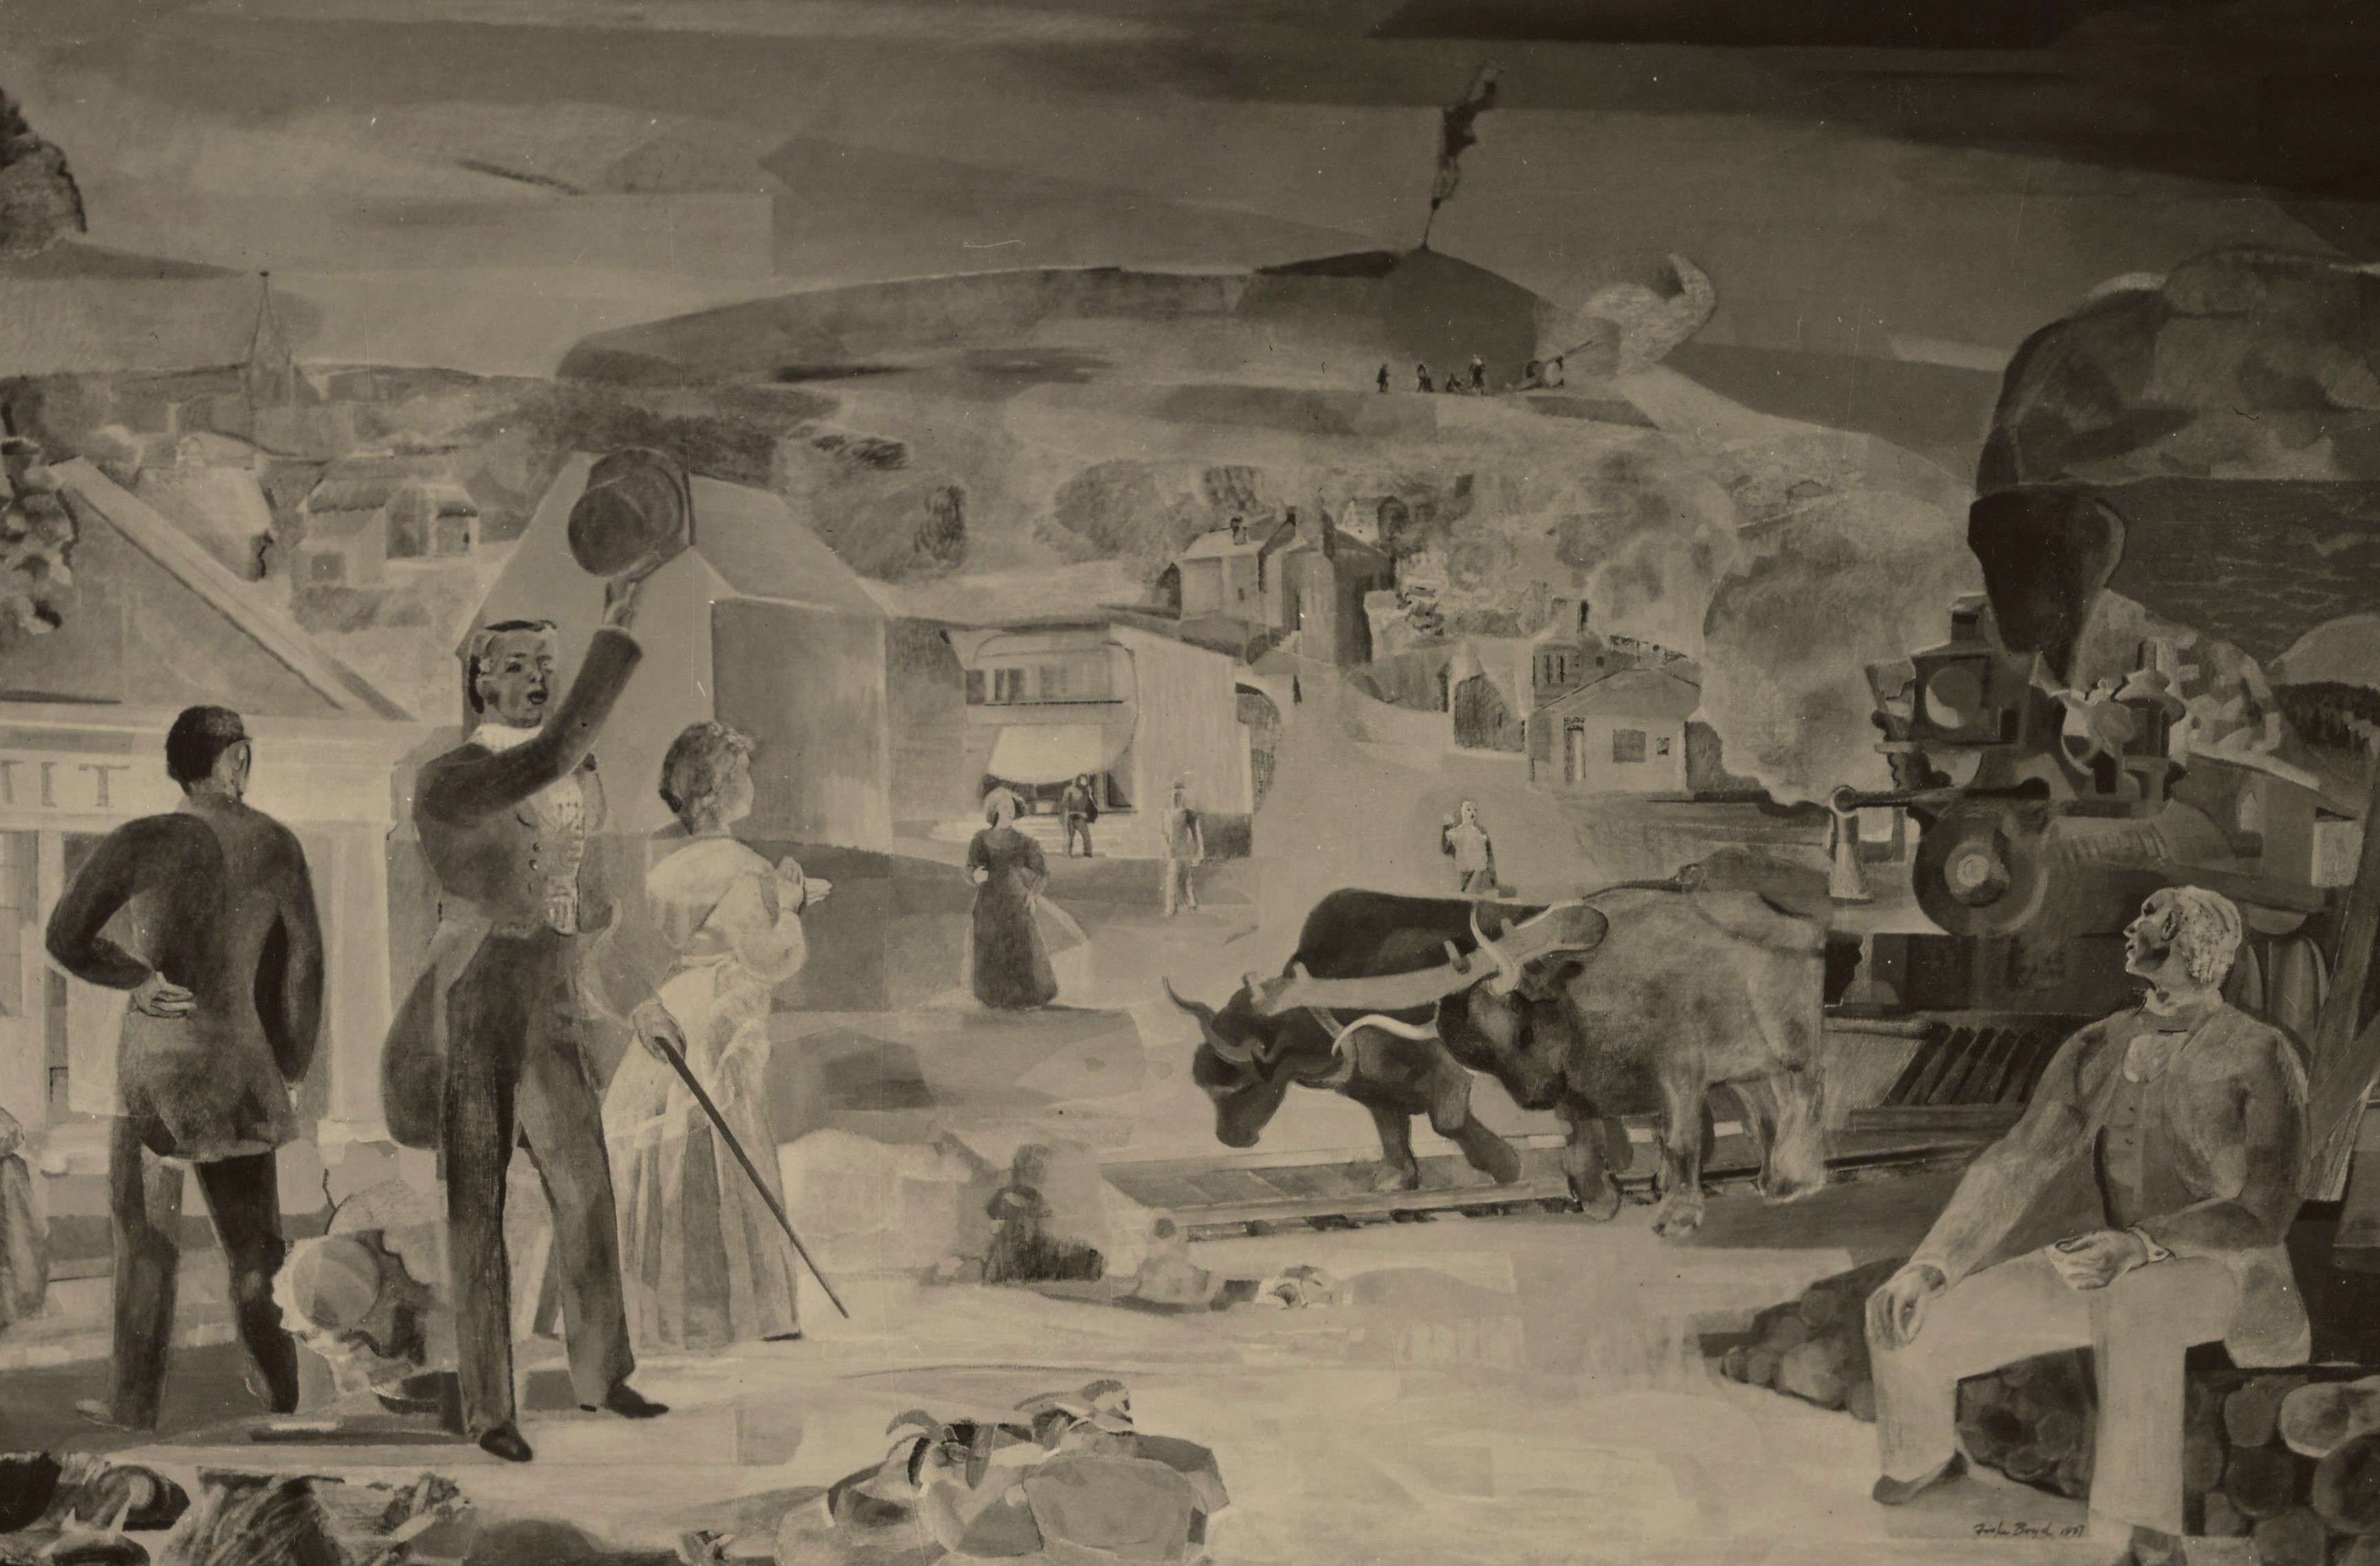 "Arrival of the First Train" and "Stage Coach Attack," Summit, NJ Post Office Mural by Fiske Boyd